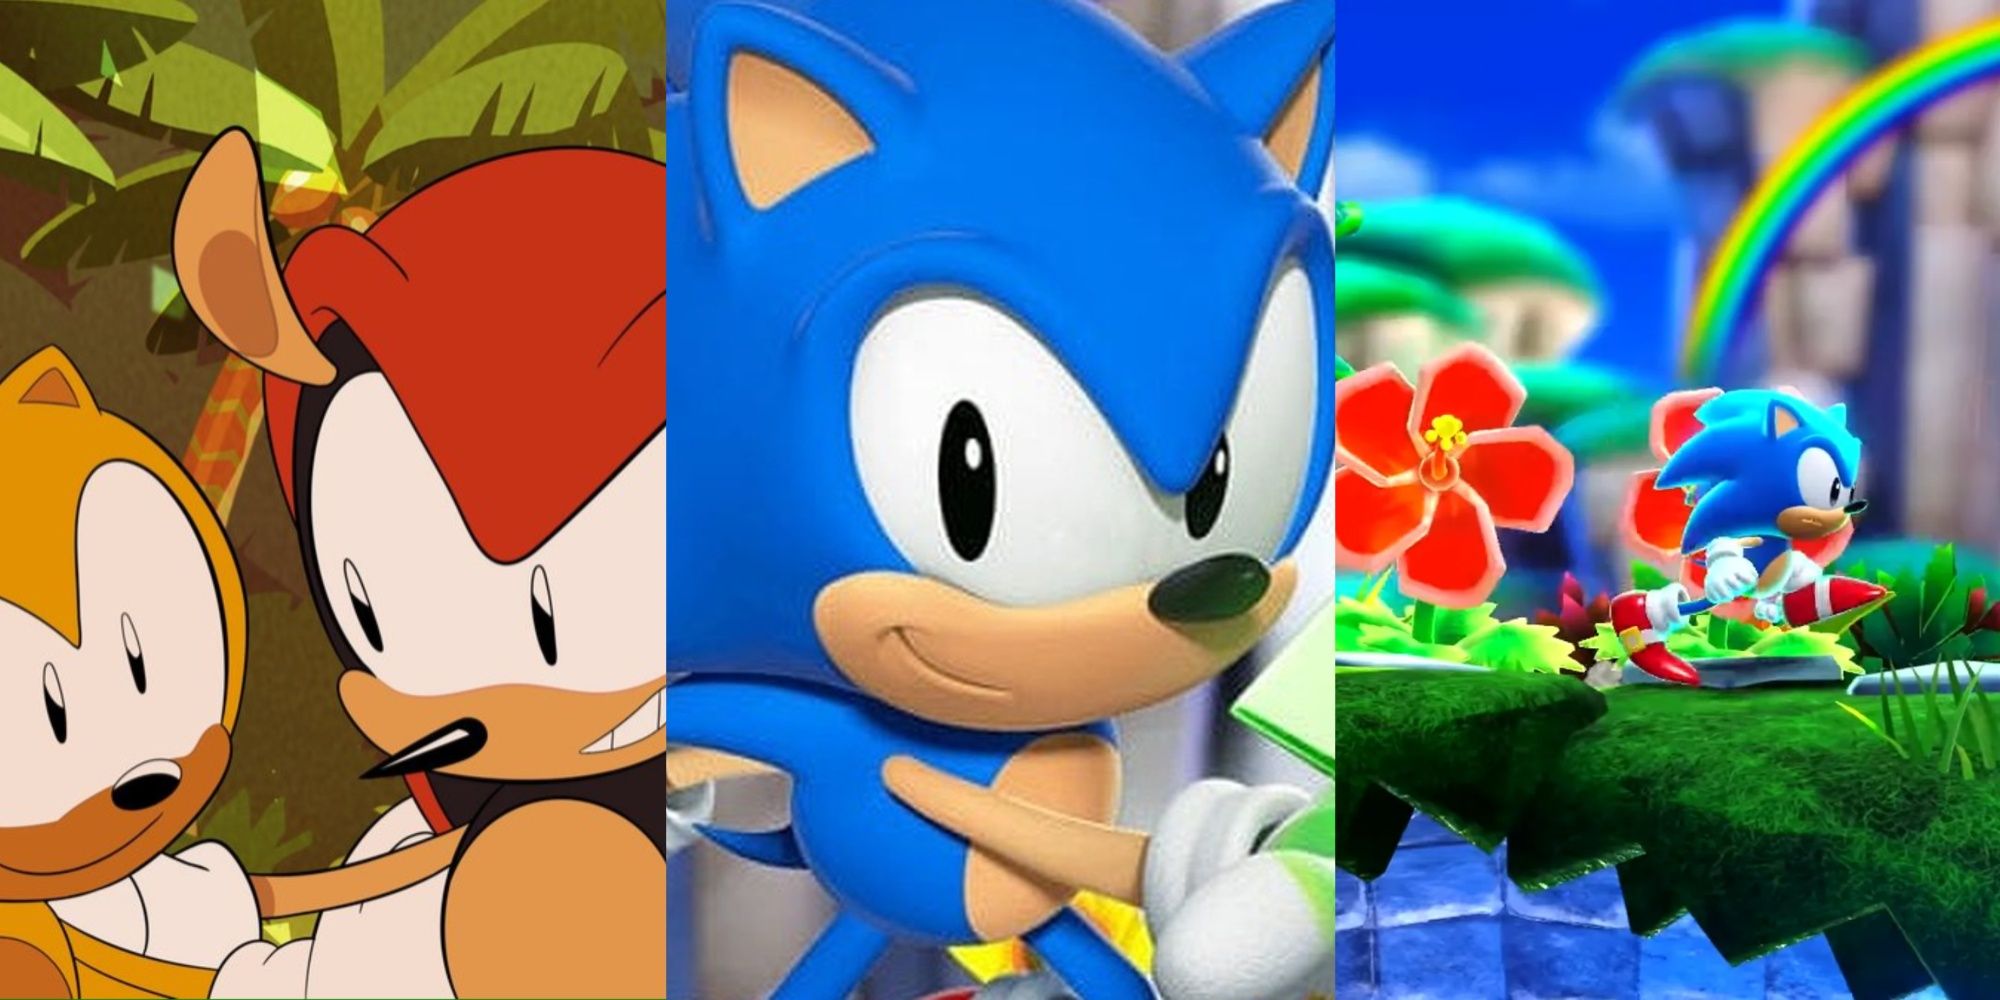 Mighty  Sonic, Sonic the hedgehog, Sonic franchise